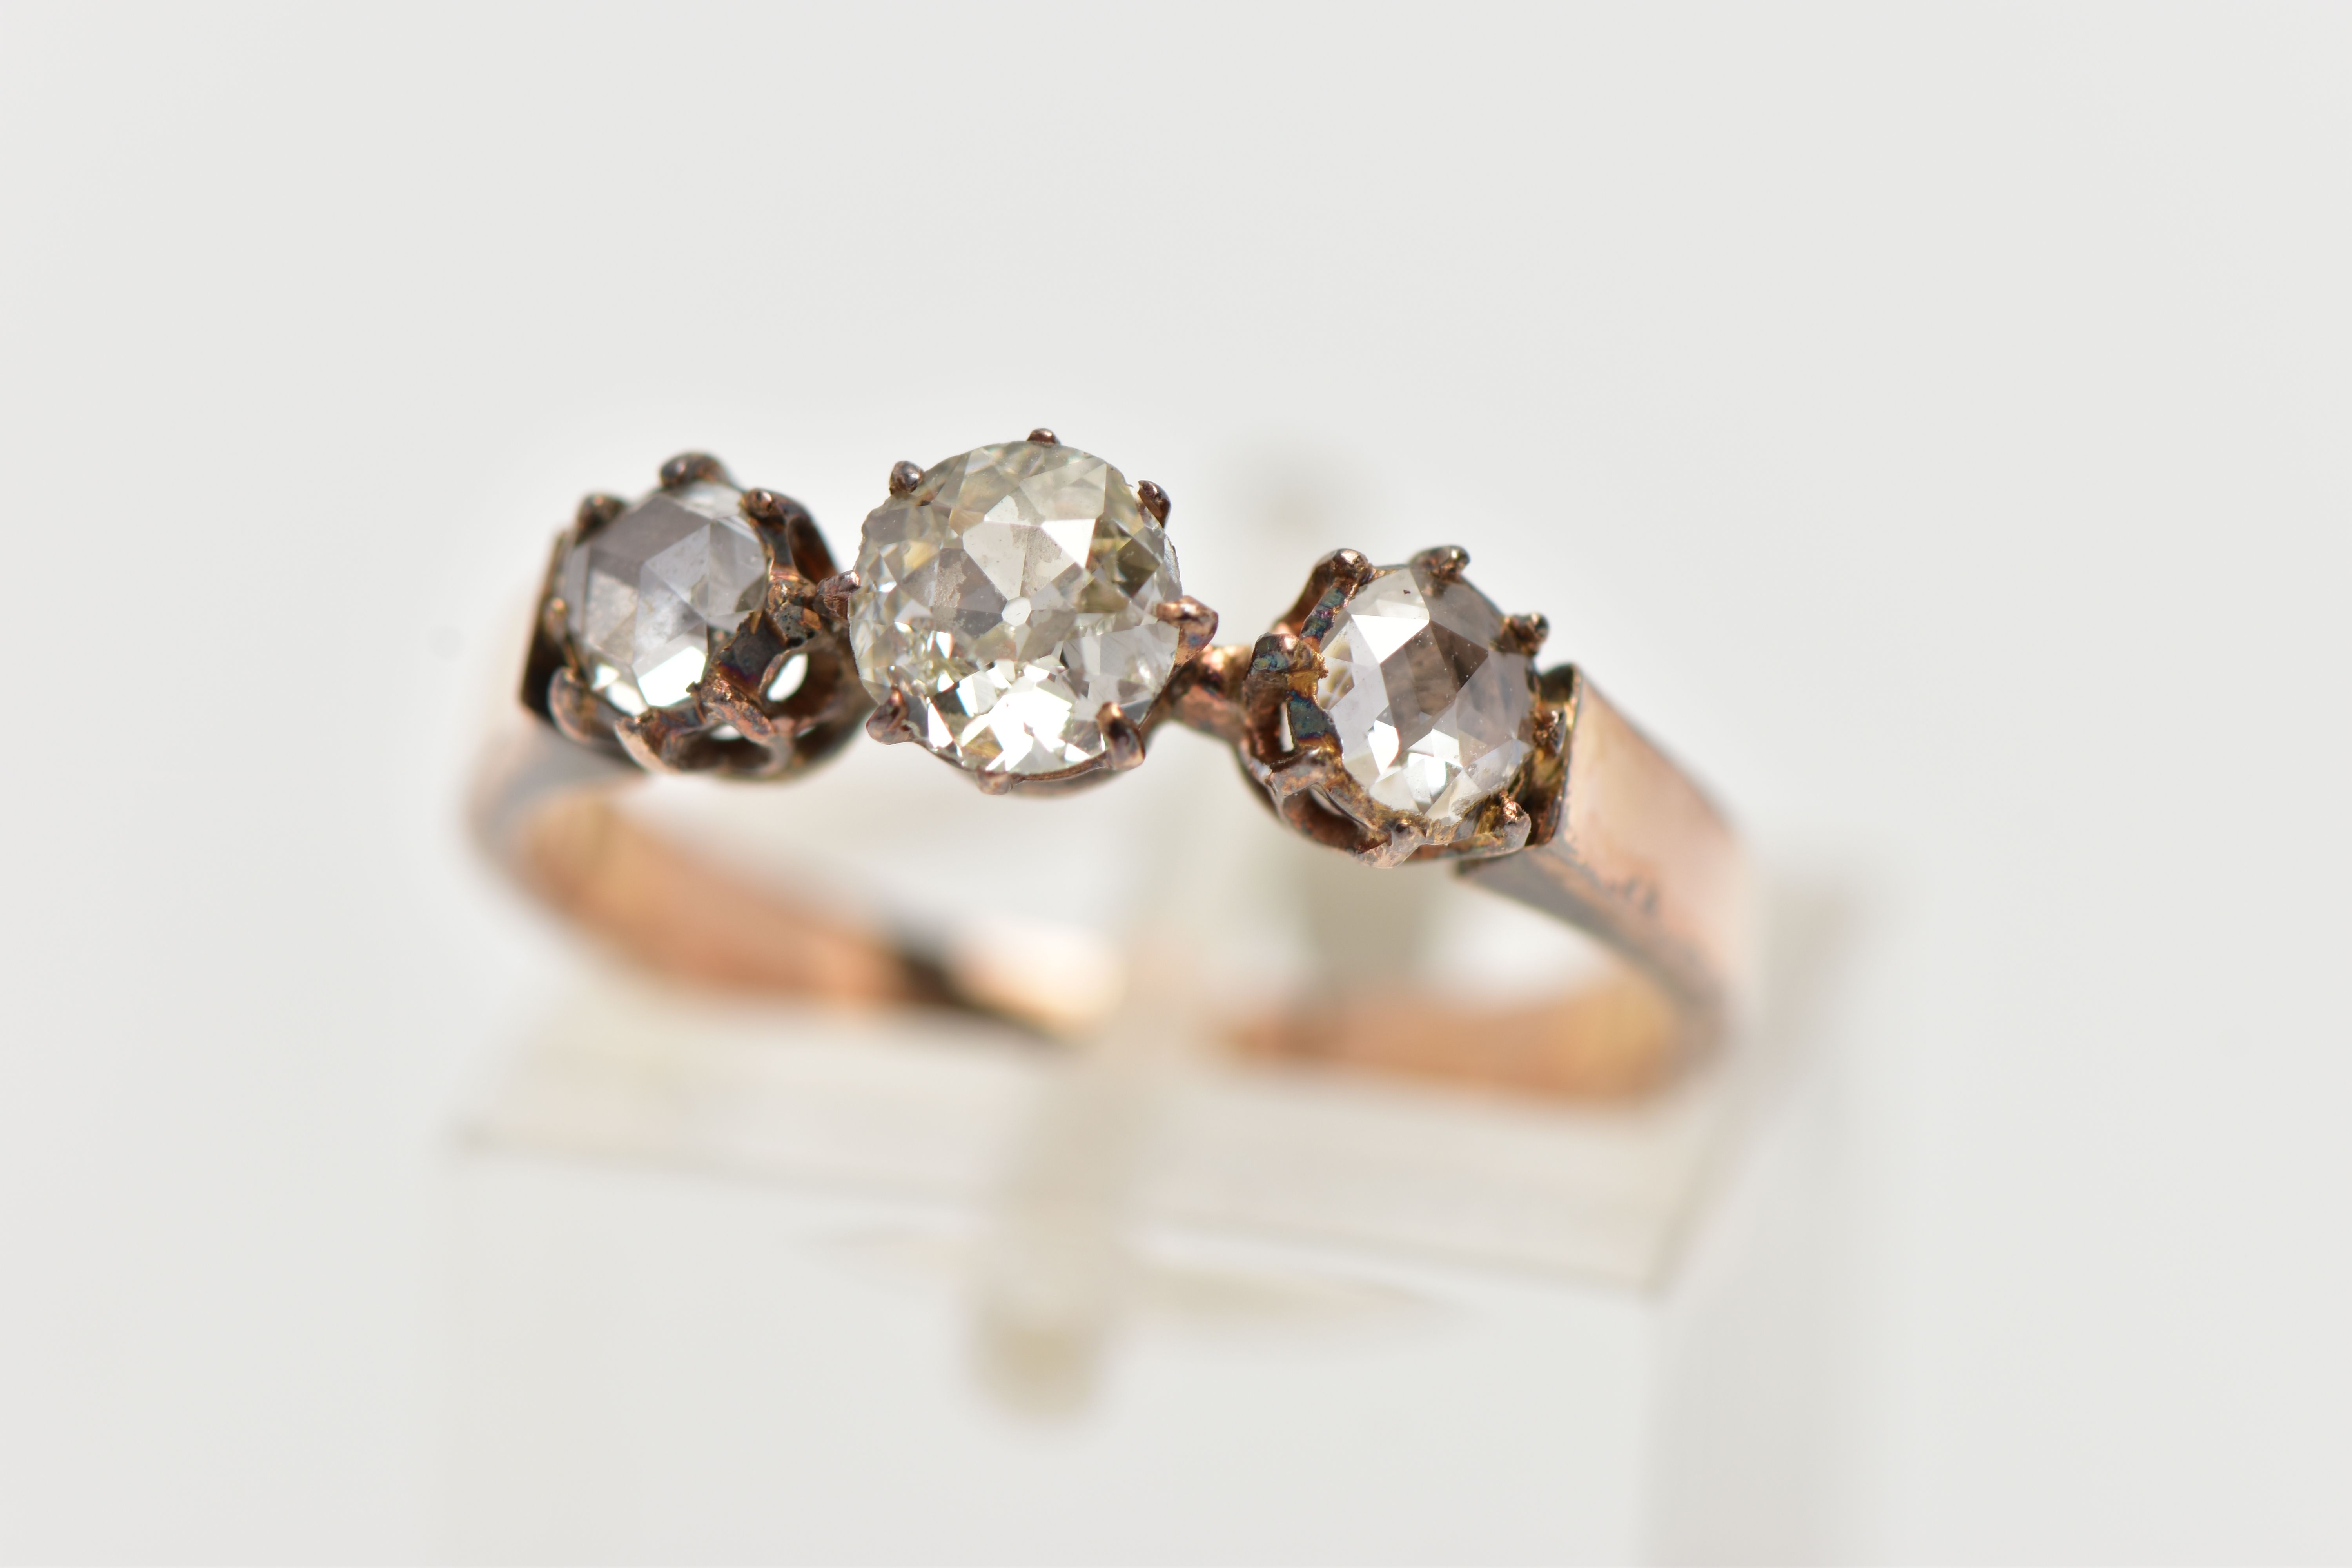 A YELLOW METAL DIAMOND RING, centering on an old cut diamond, and two rose cut diamonds, prong set